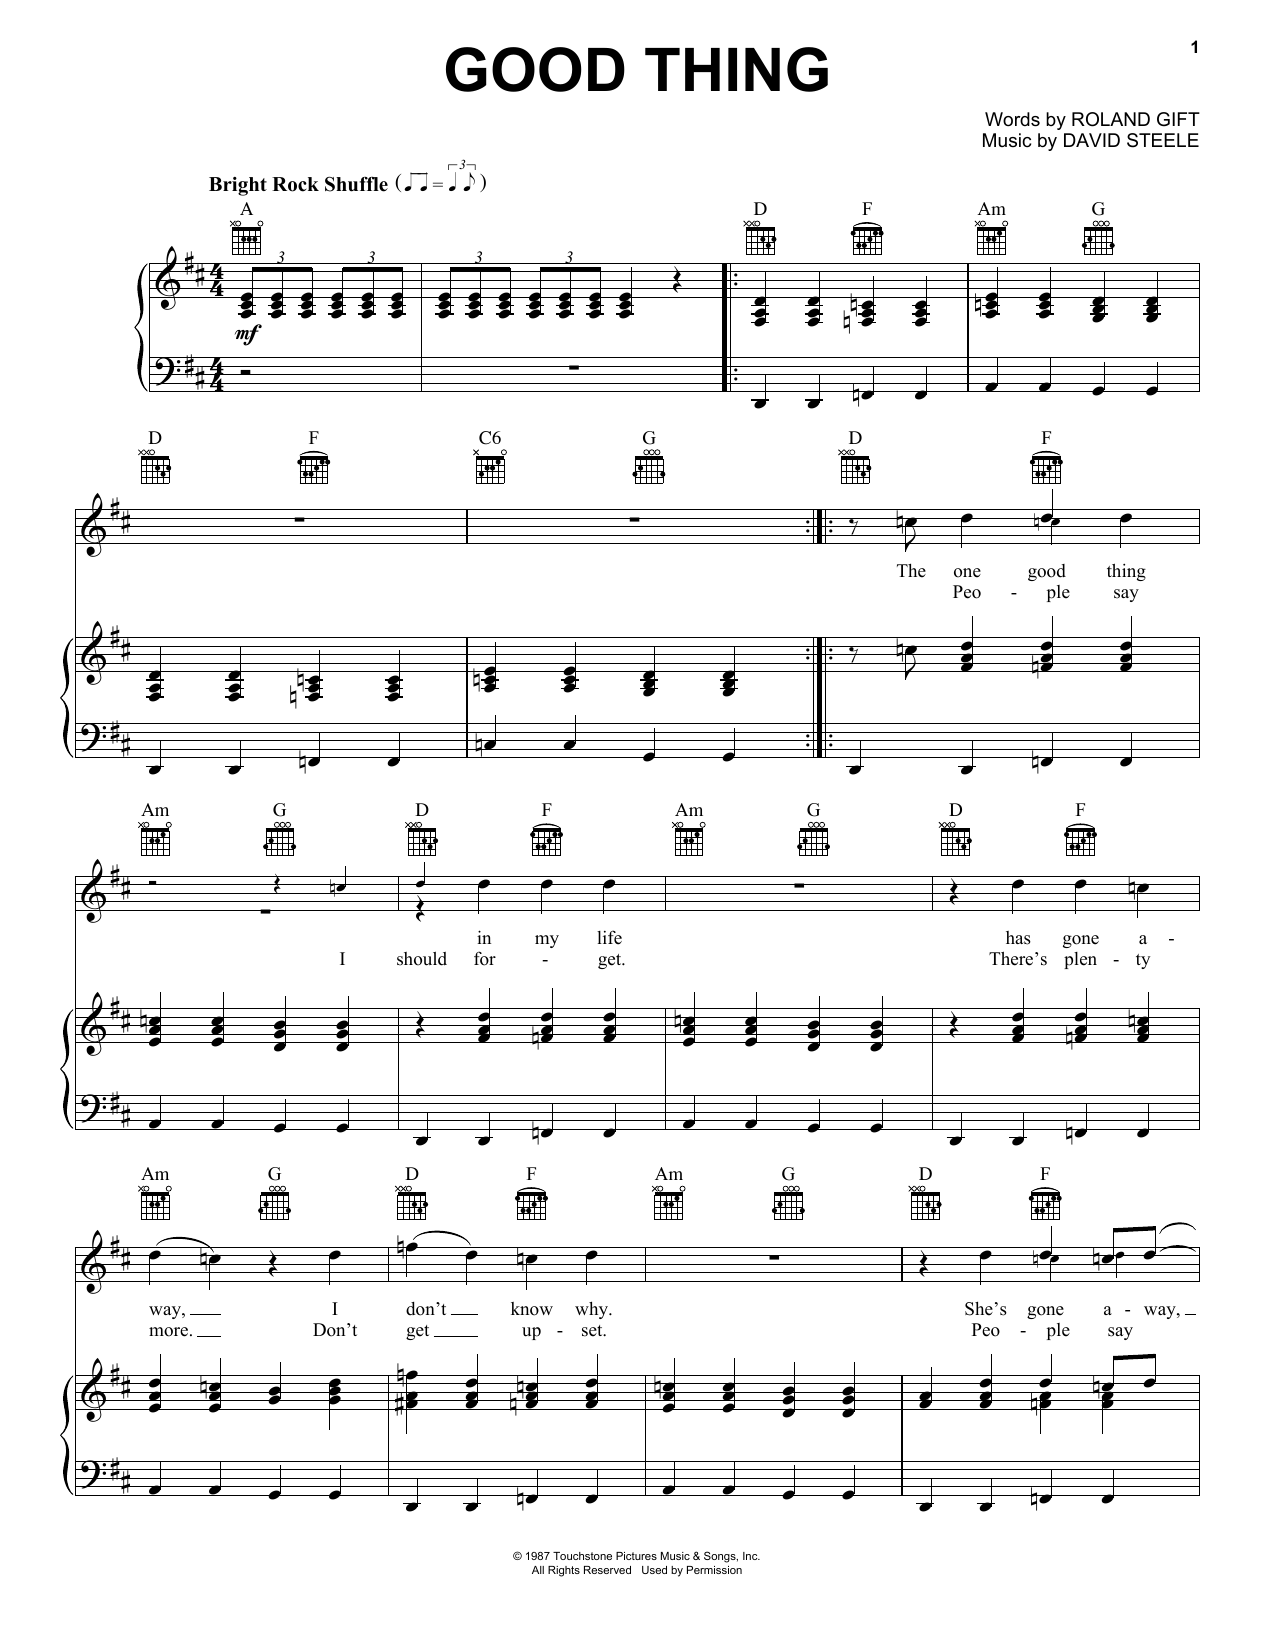 Download Fine Young Cannibals Good Thing Sheet Music